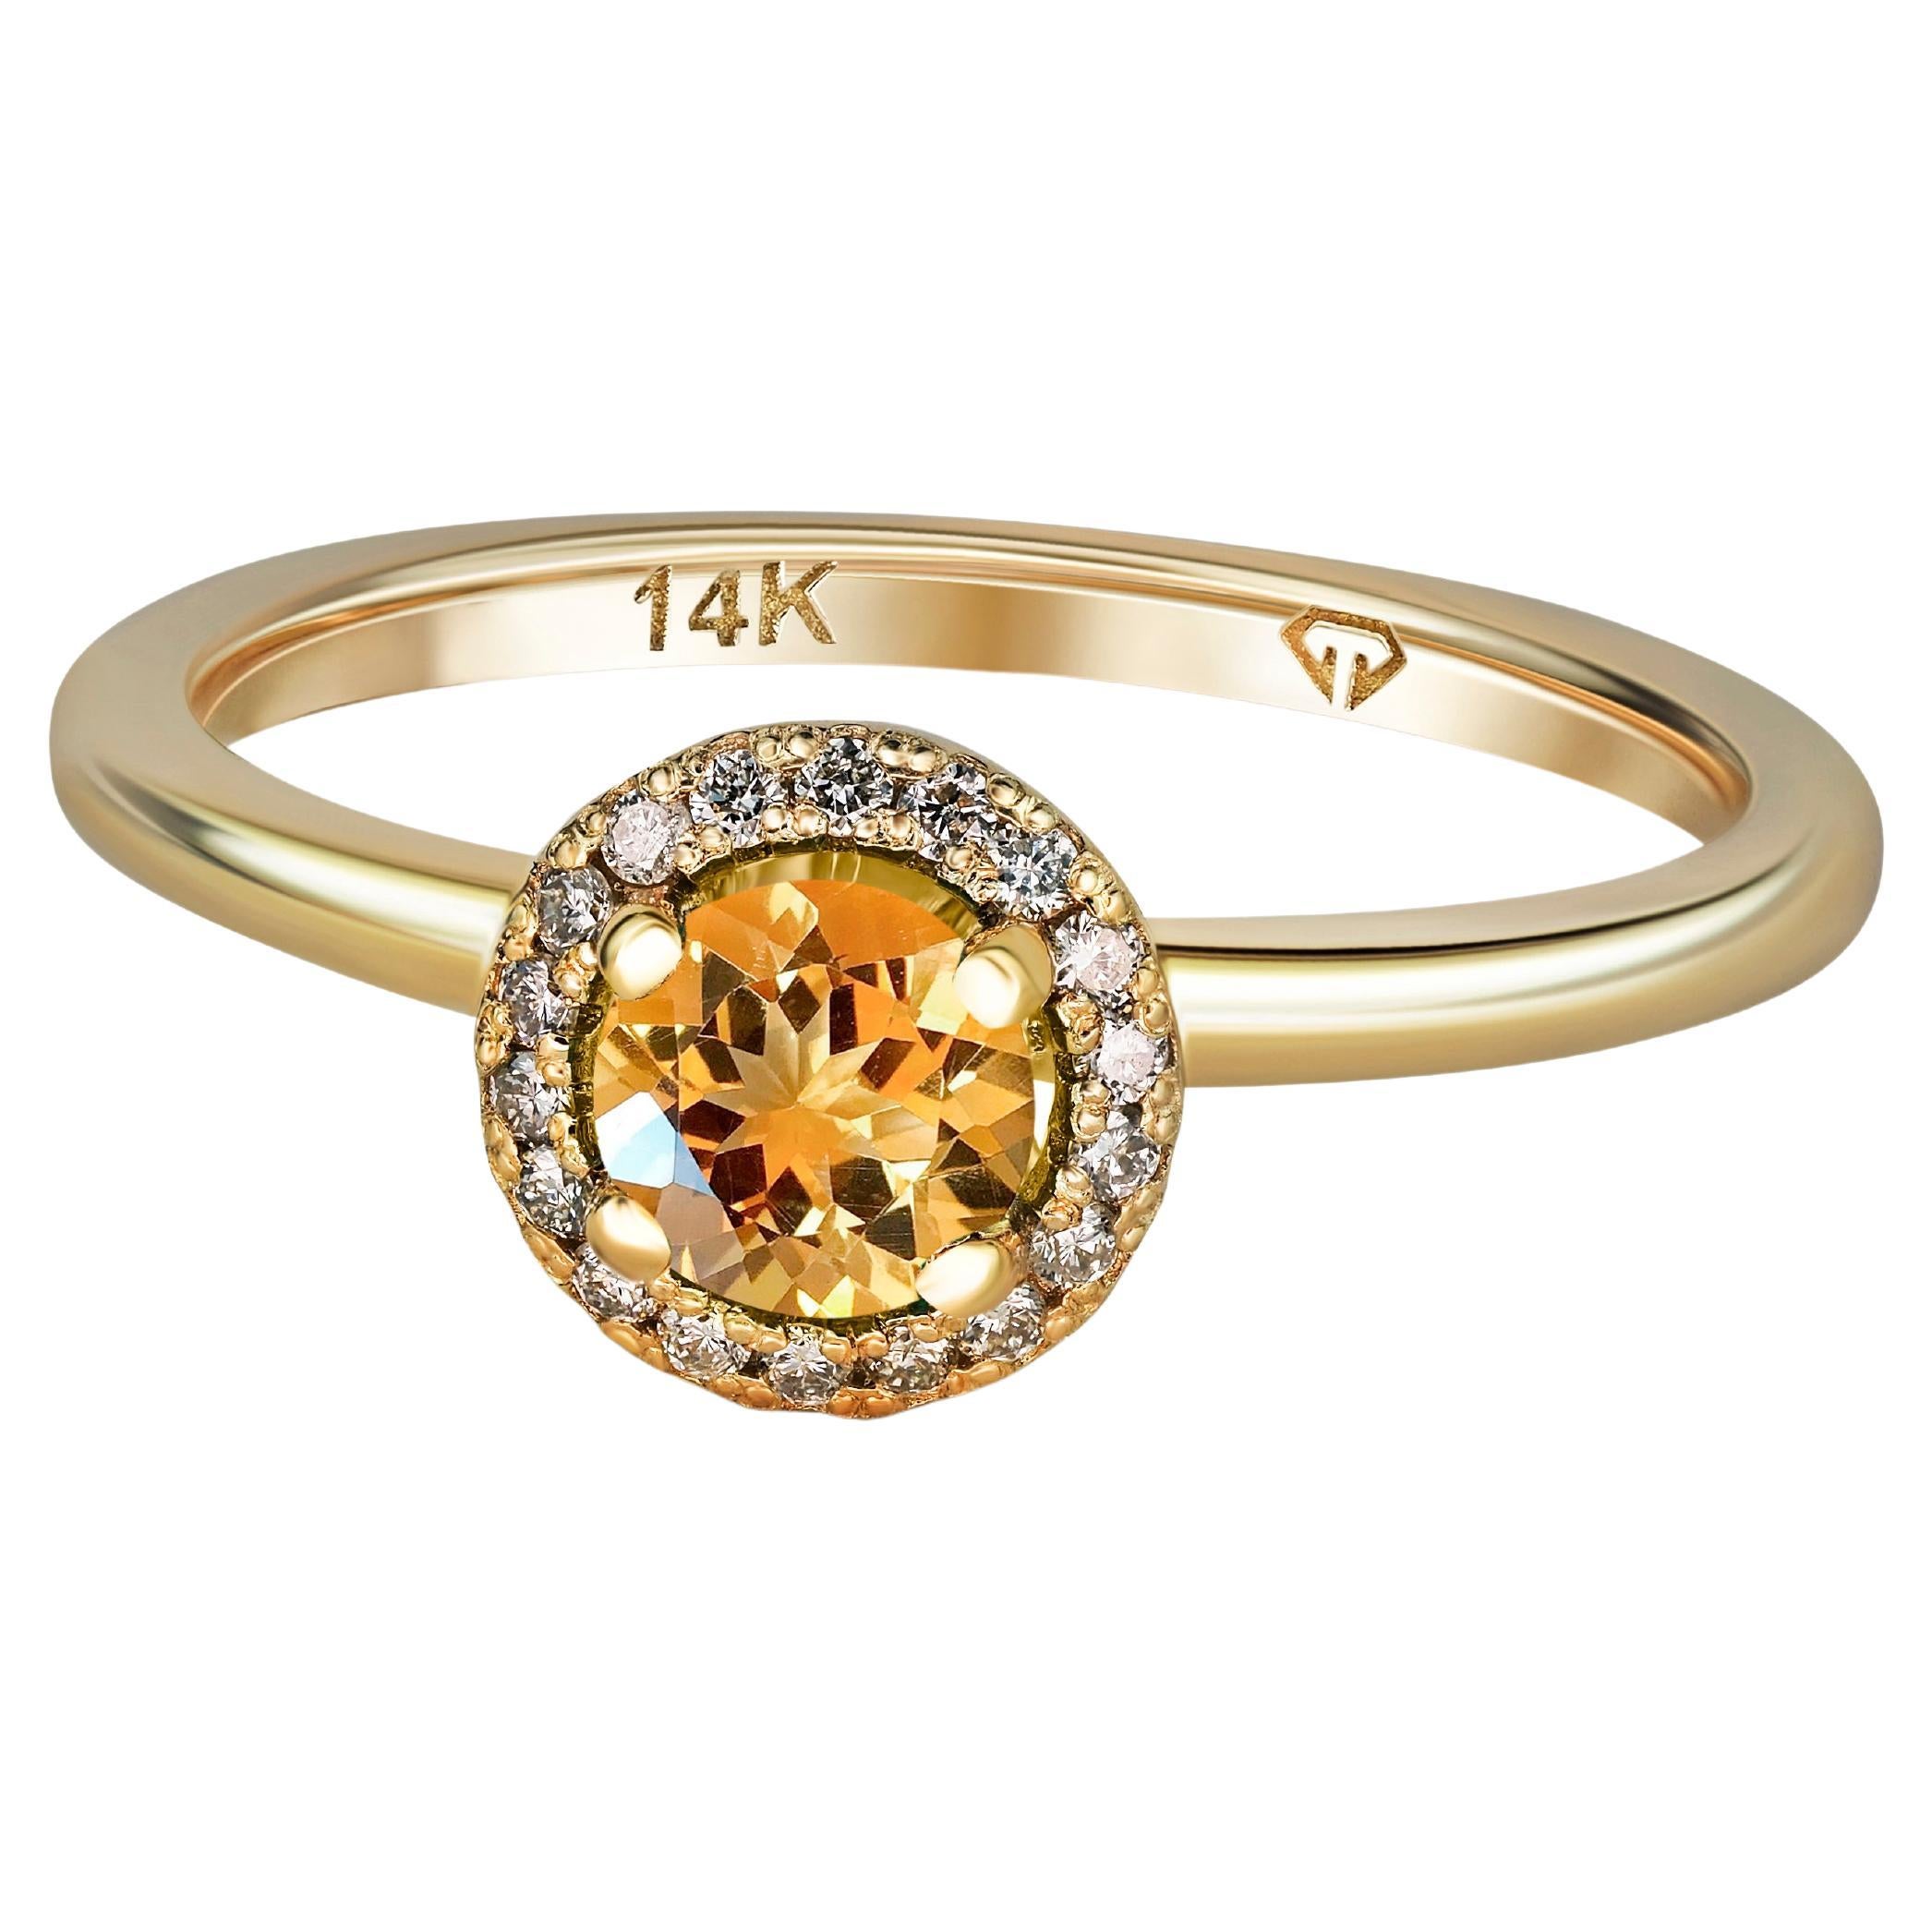 Halo Citrine Ring with Diamonds in 14 Karat Gold.  For Sale